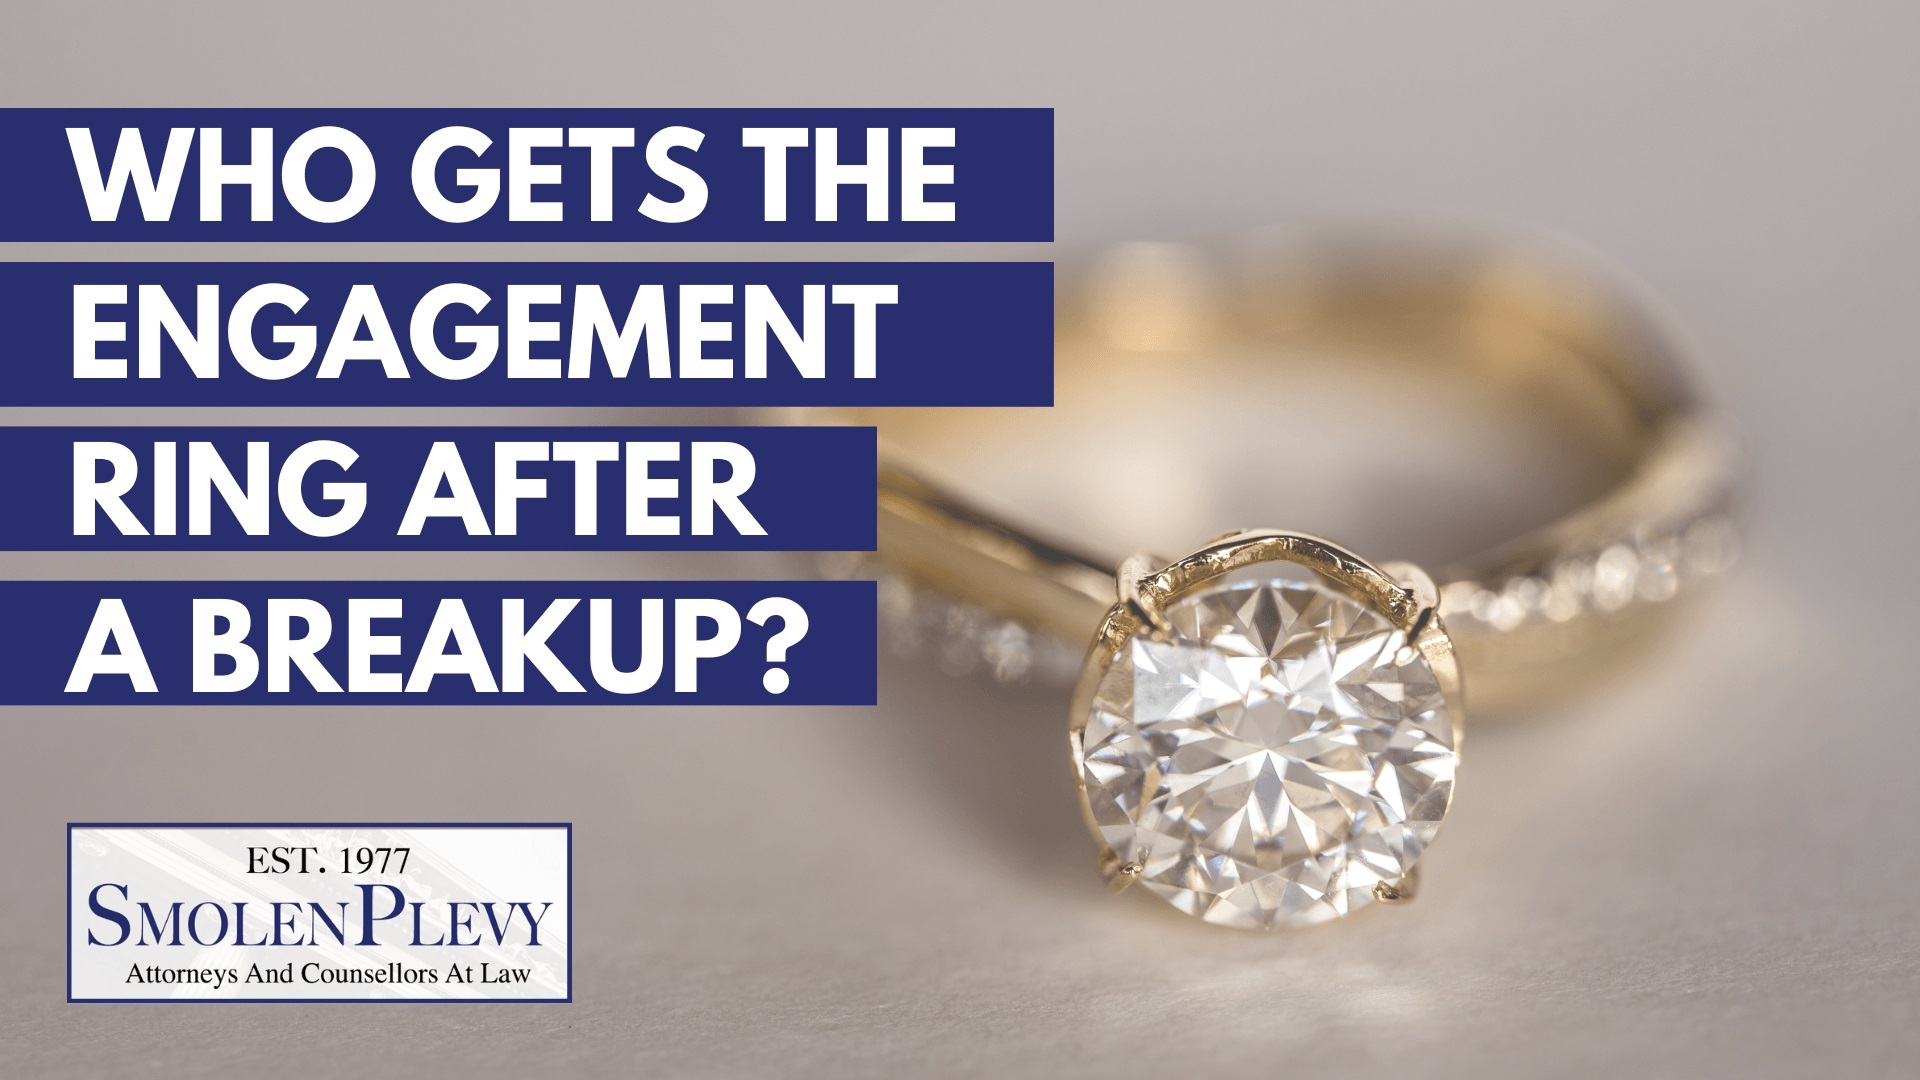 Who Gets the Engagement Ring After a Breakup?